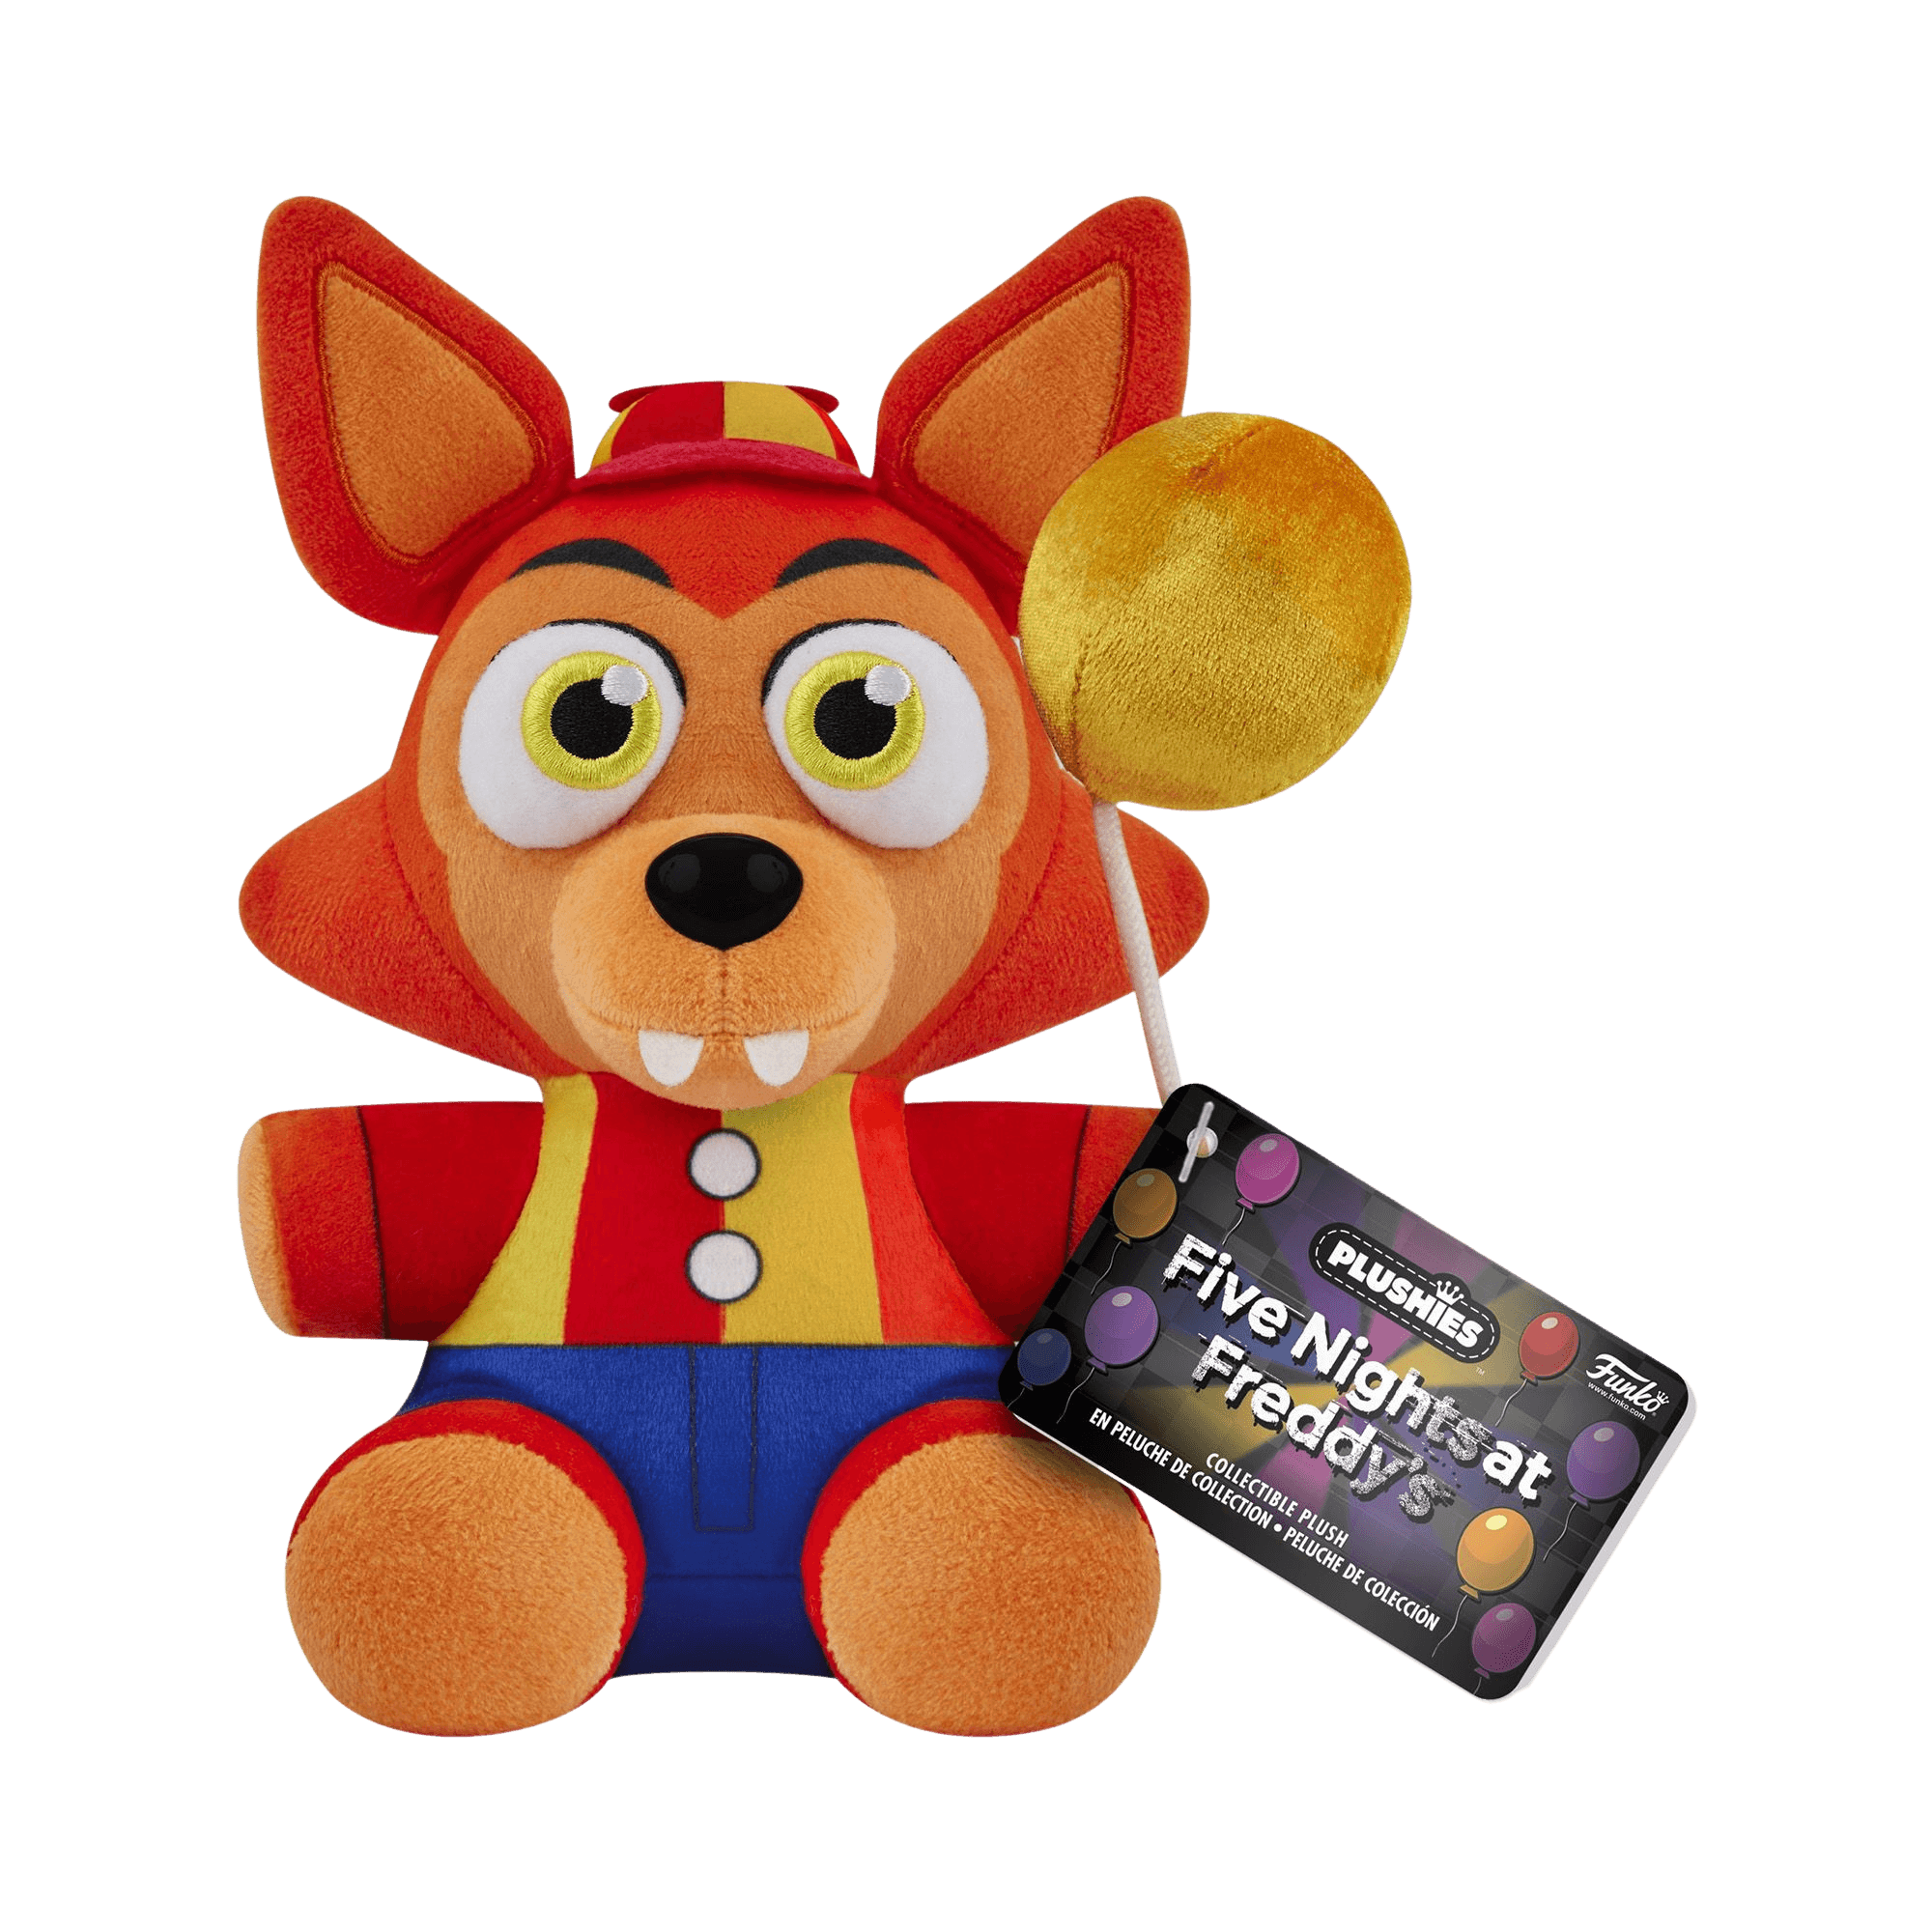 Funko - Five Nights at Freddy's - Balloon Foxy Plush (7in) - The Card Vault